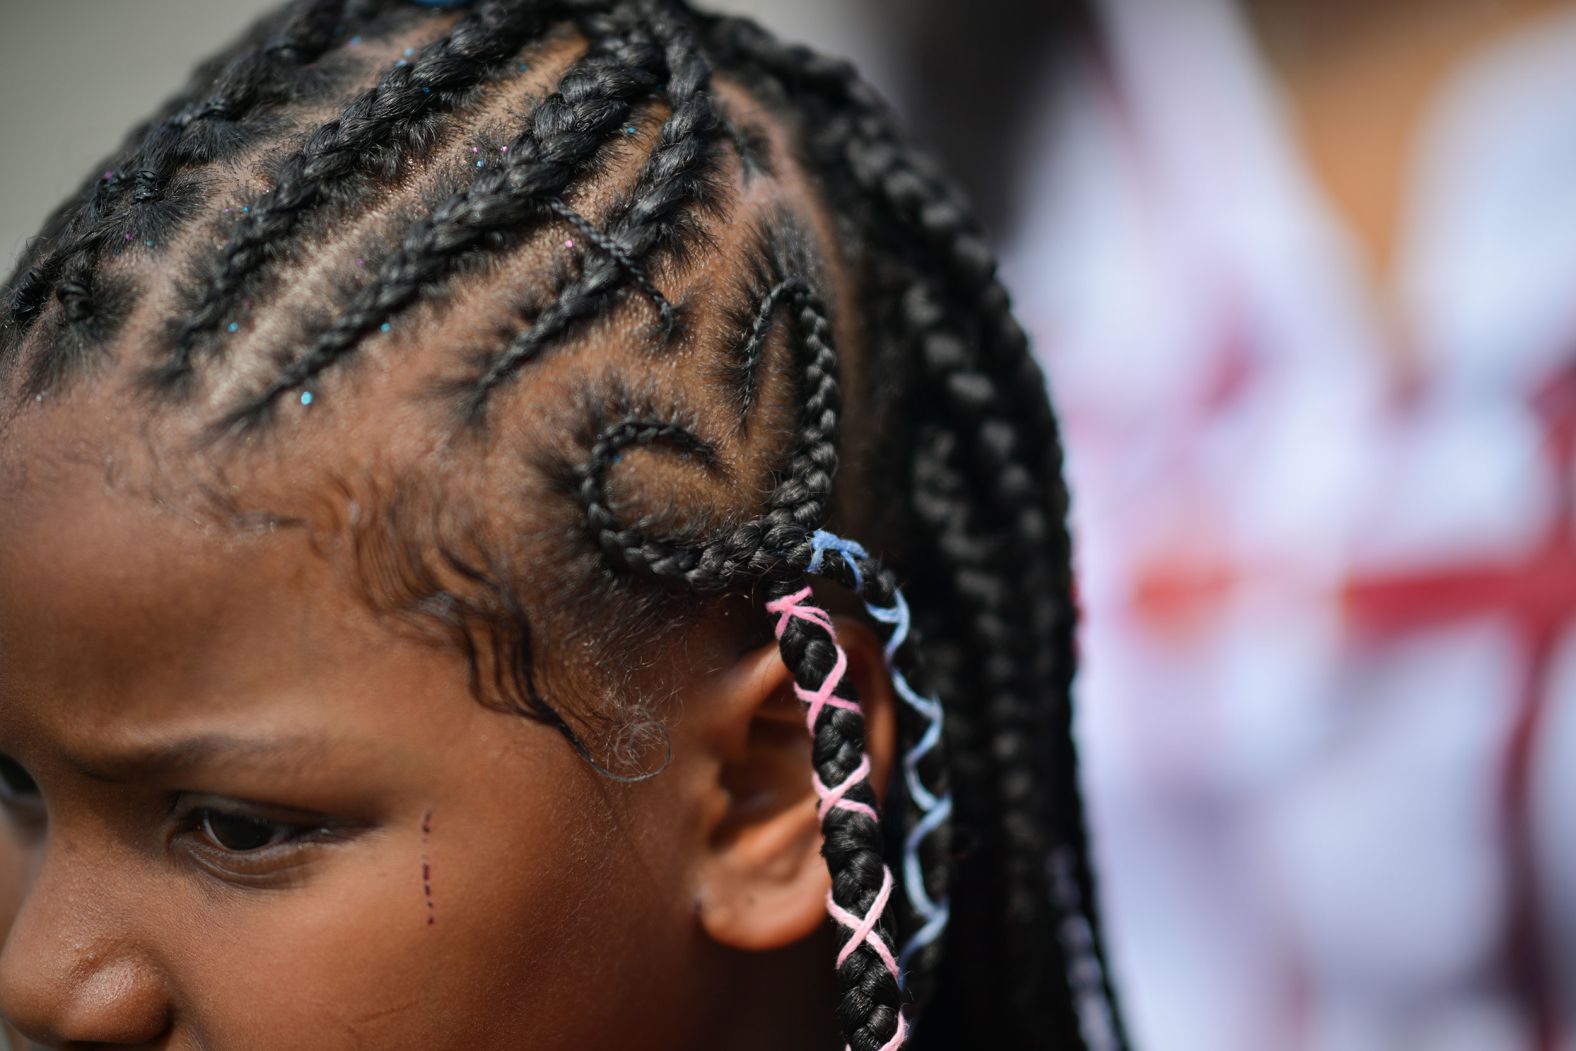 A girl has a heart braided into her hair during a back-to-school drive in Atlanta on Sunday, August 7. The annual event, hosted by rapper 21 Savage, provided school supplies, uniforms and shoes for the children in attendance.